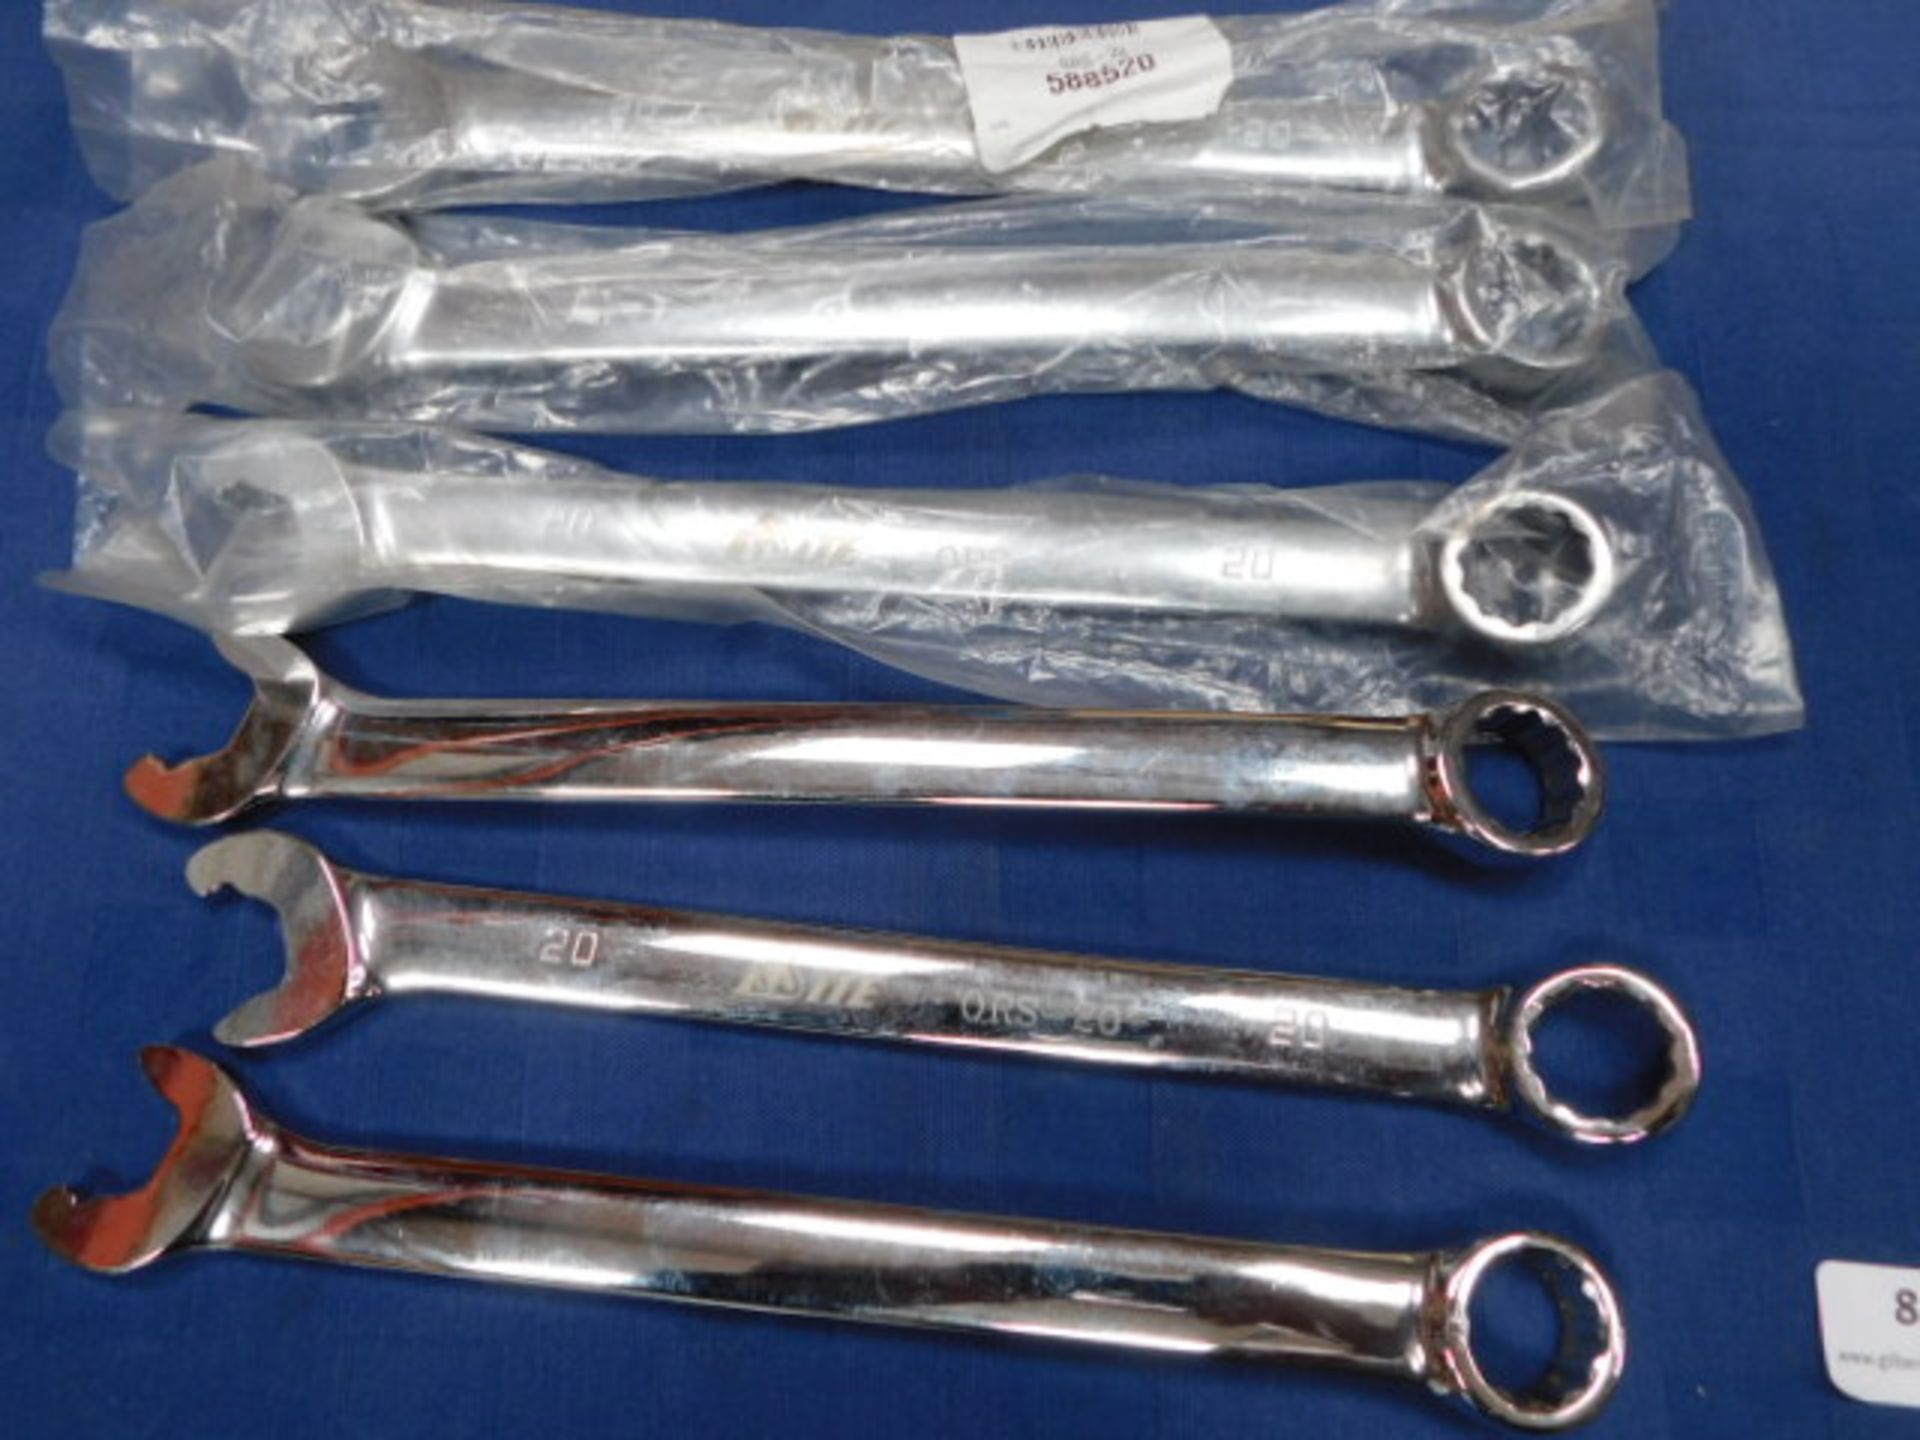 * 6x 20mm Spanners